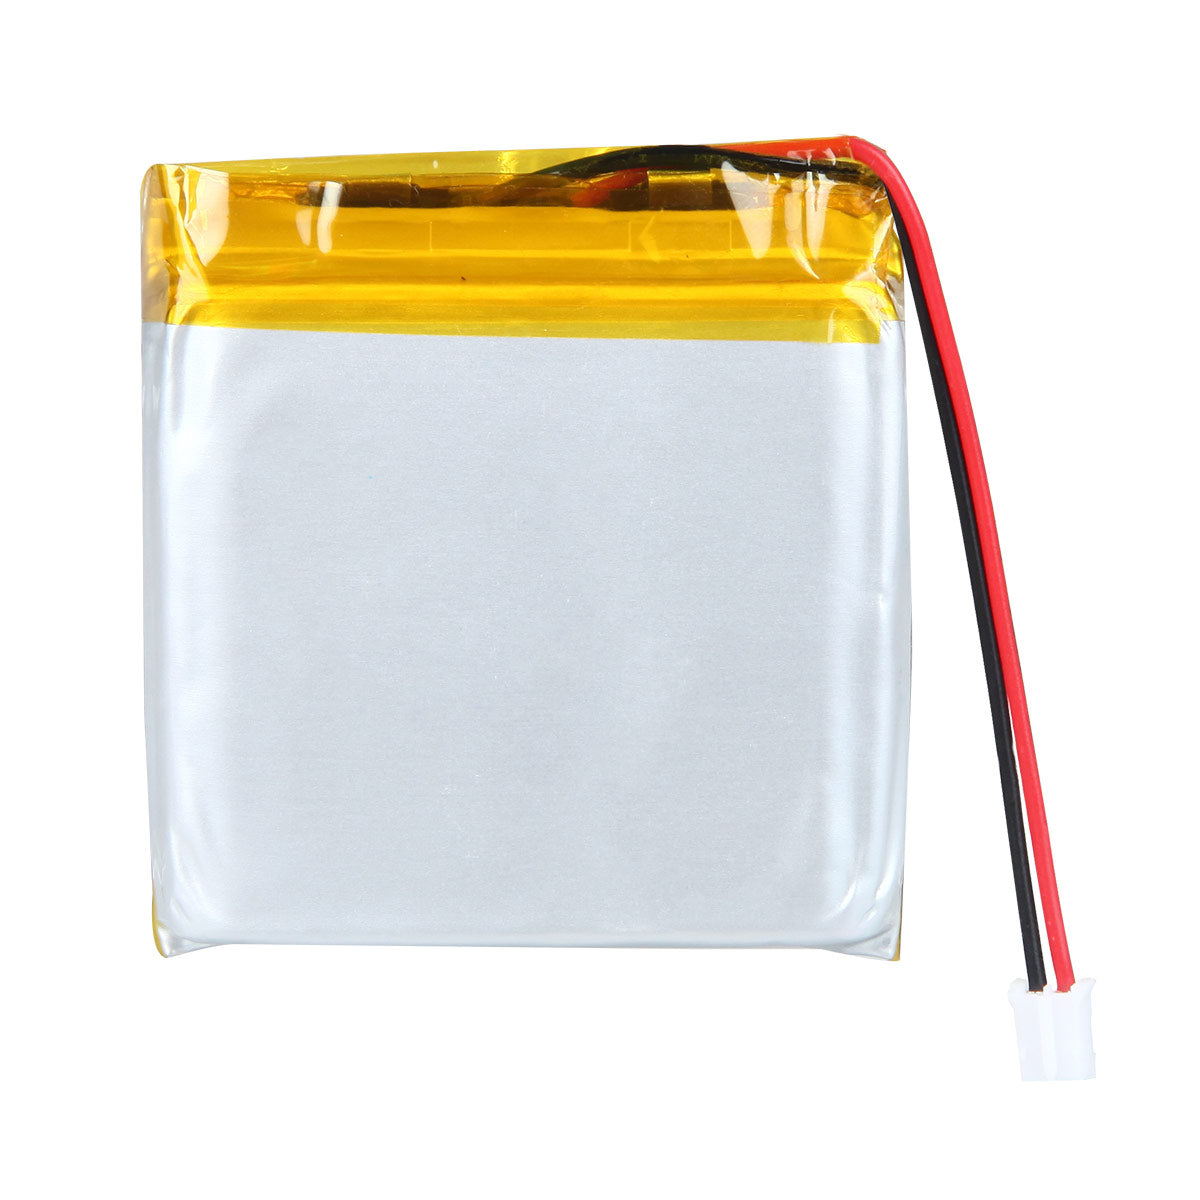 YDL 3.7V 4000mAh 125054 Rechargeable Lithium  Polymer Battery